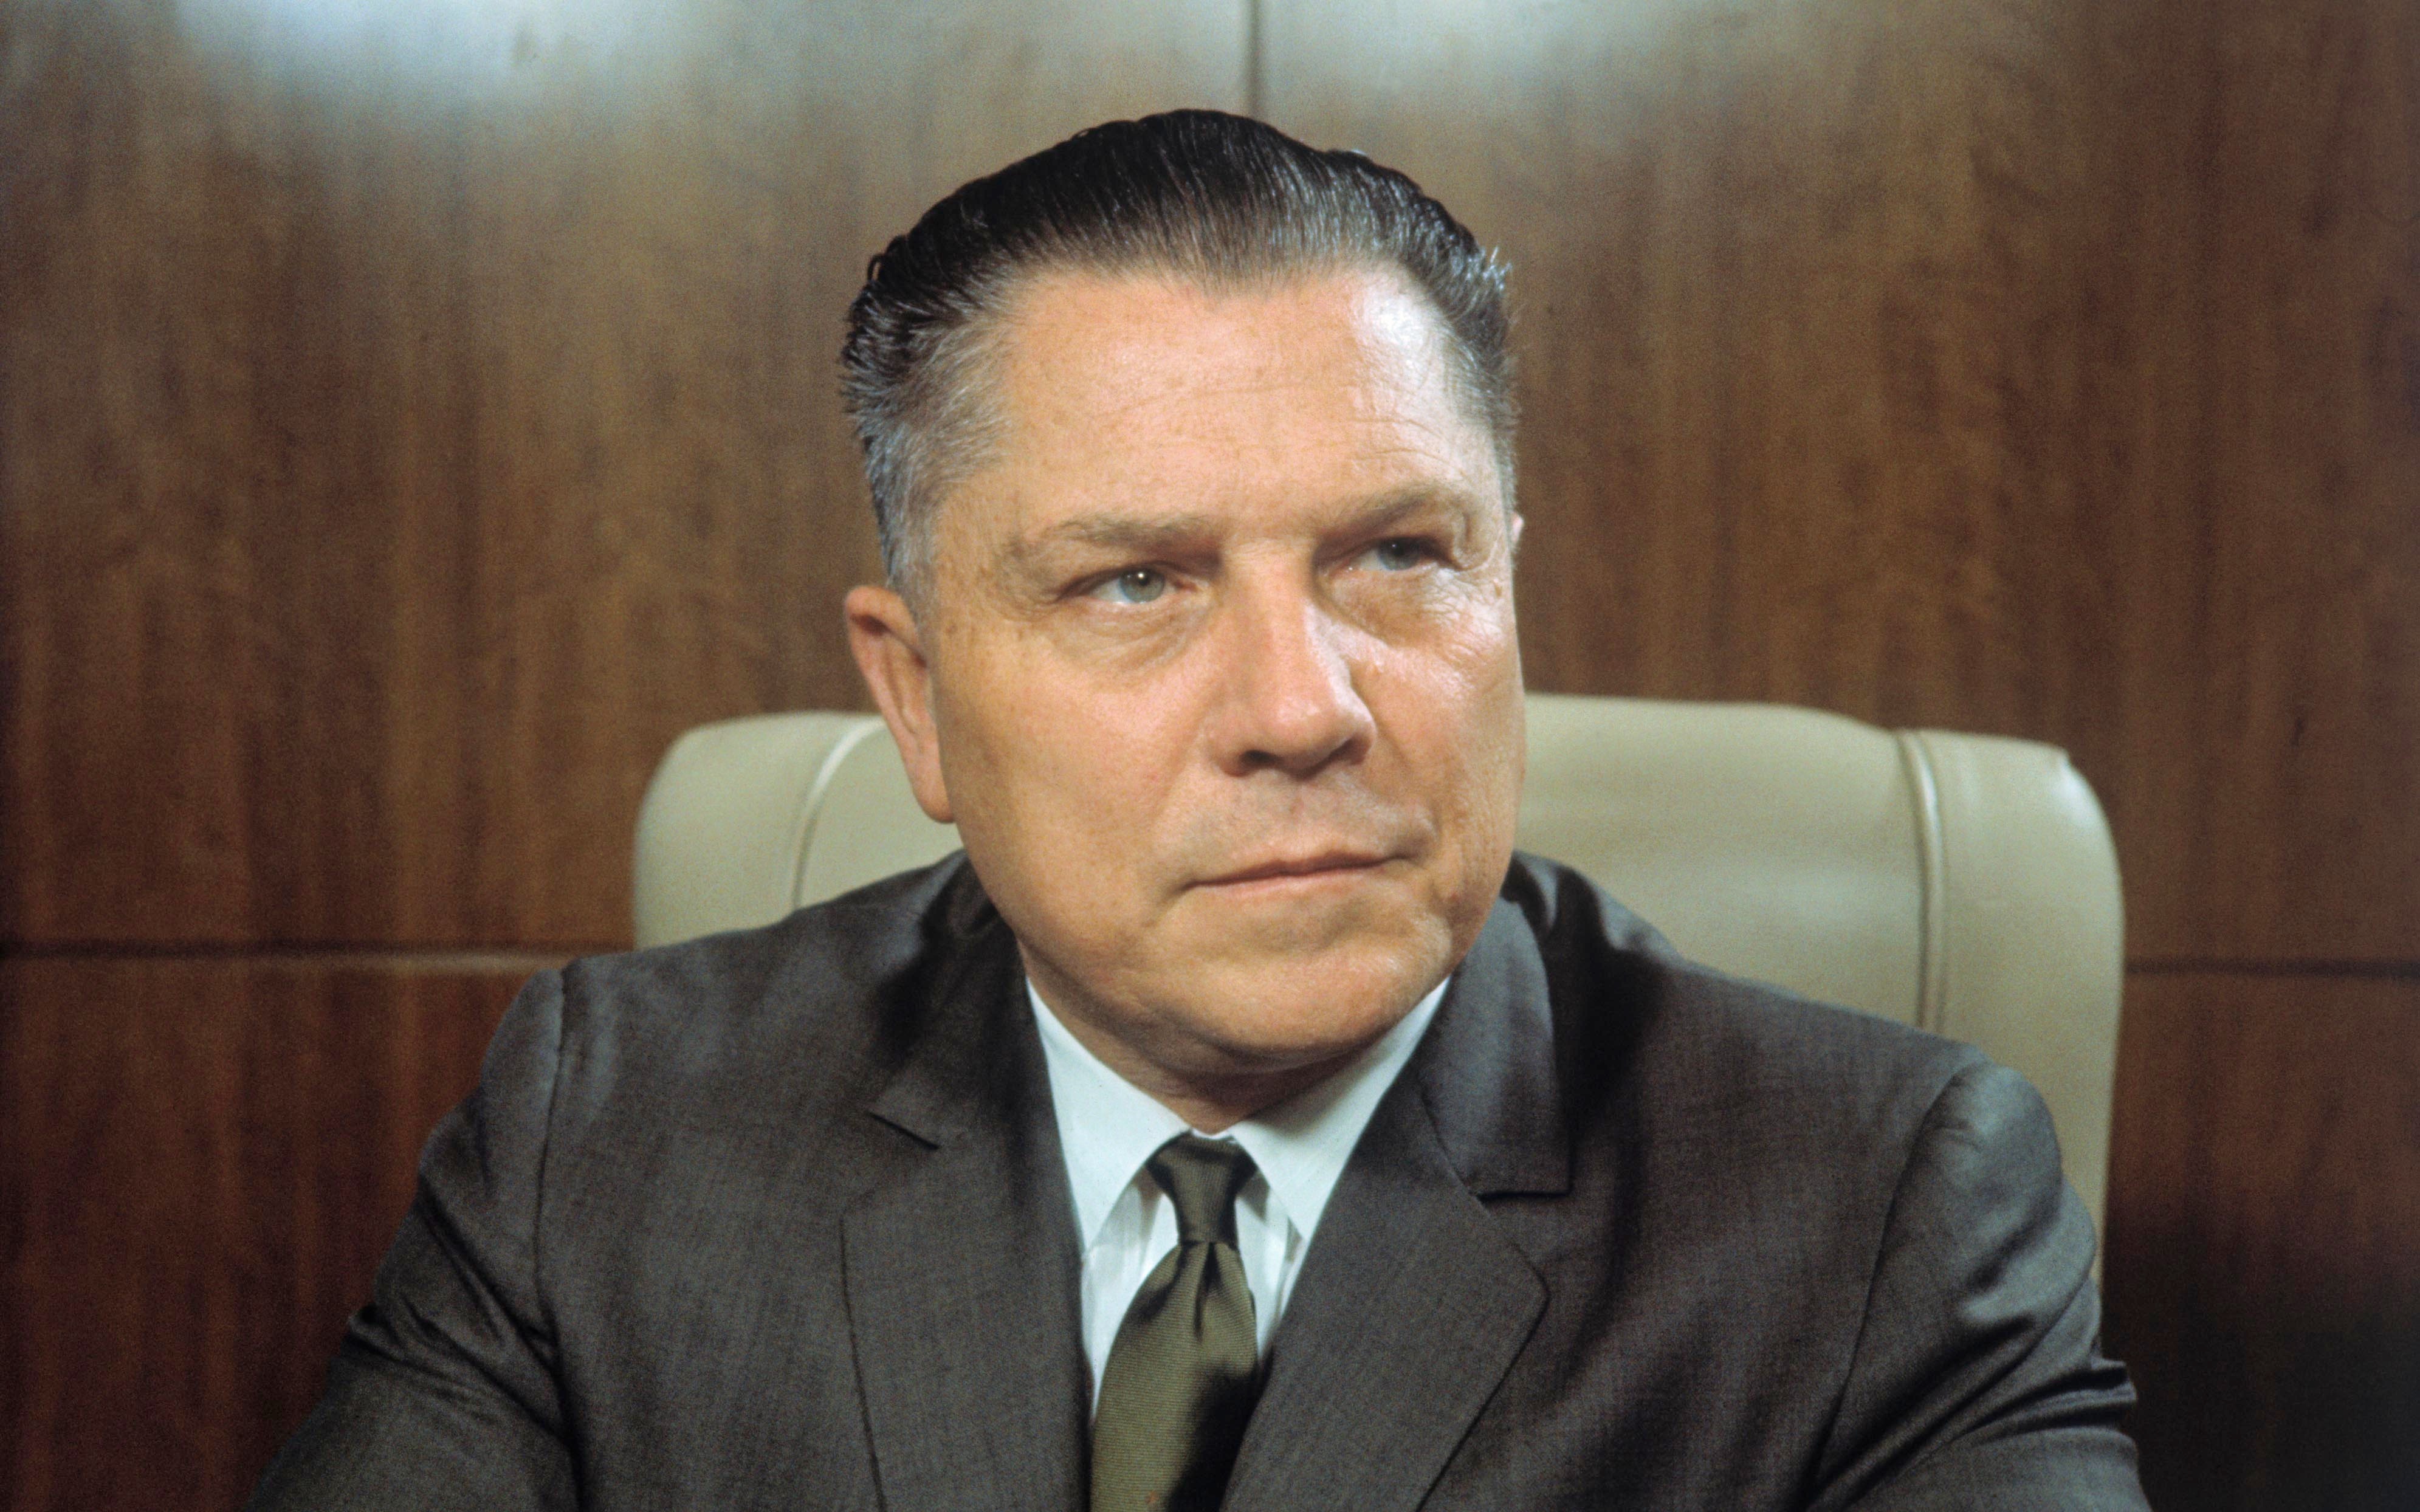 Jimmy Hoffa, a prominent union leader, vanished in 1975 after planning a meeting with Detroit mobsters. Respected by union members but linked to organized crime, his disappearance remains a mystery. Theories, including being buried in Giants Stadium, fuel ongoing speculation about his fate.